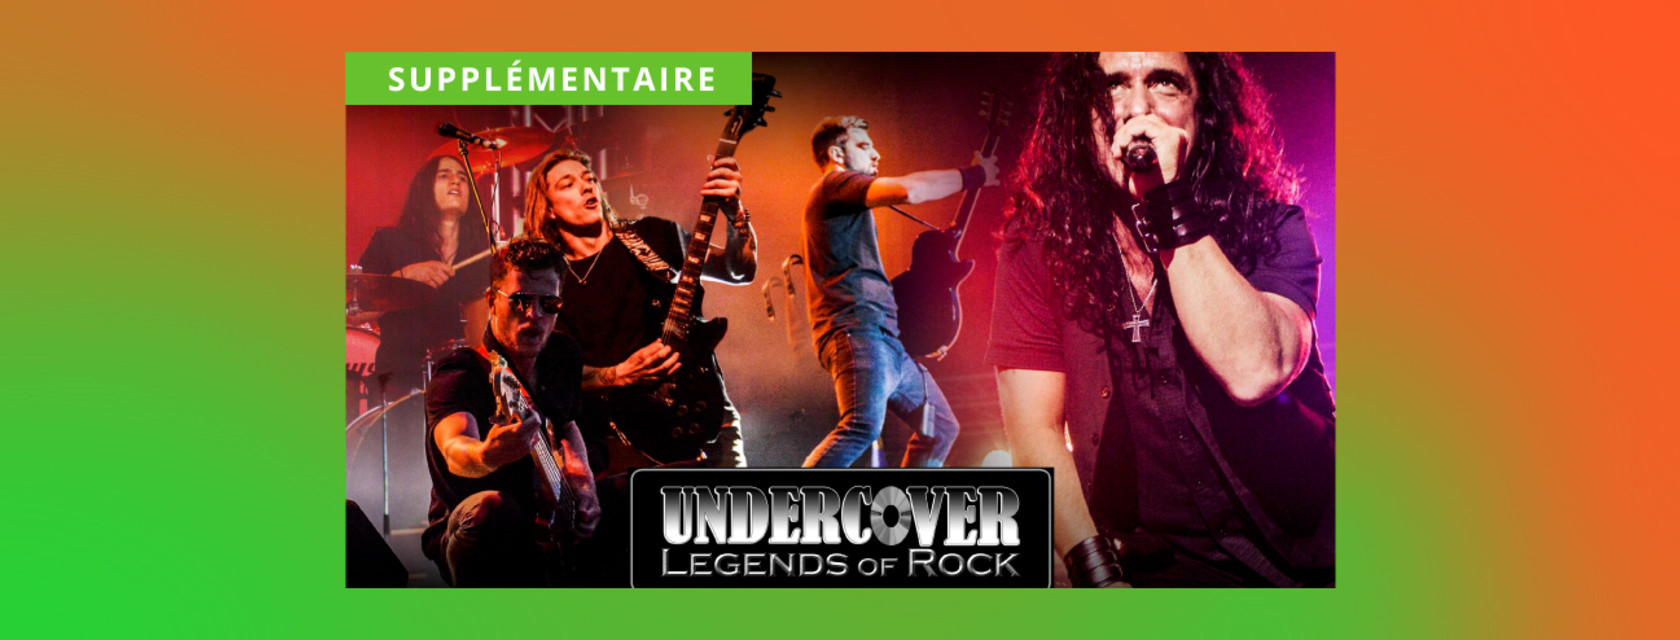 An additional show for the band Undercover Legends of Rock